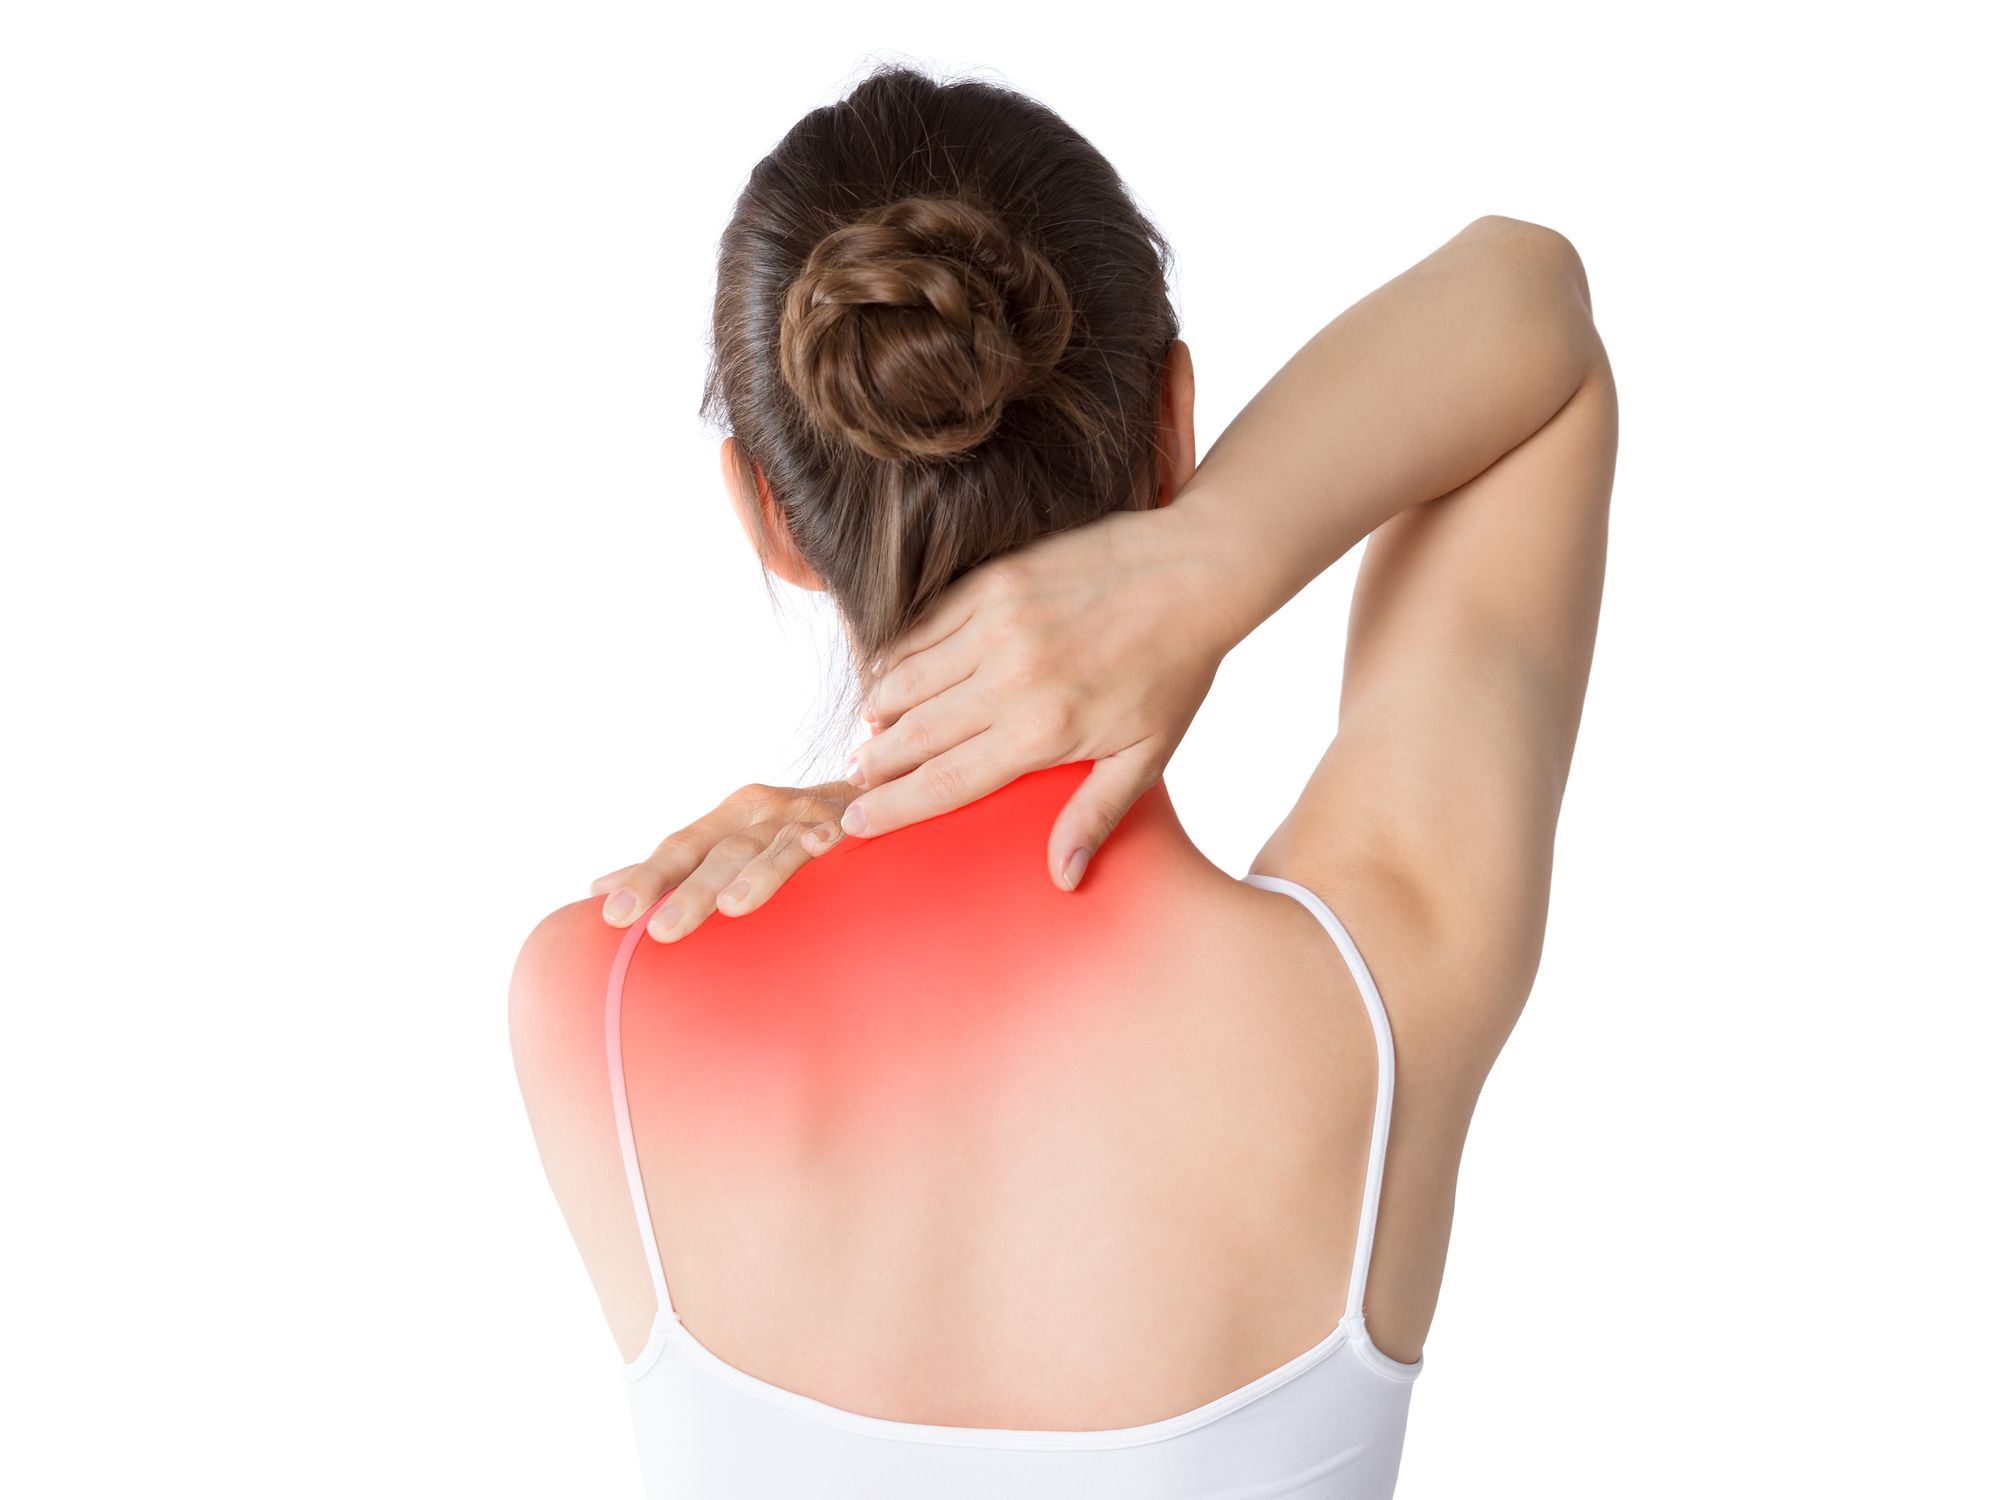 How Can a Chiropractor Help My Upper Back Pain?